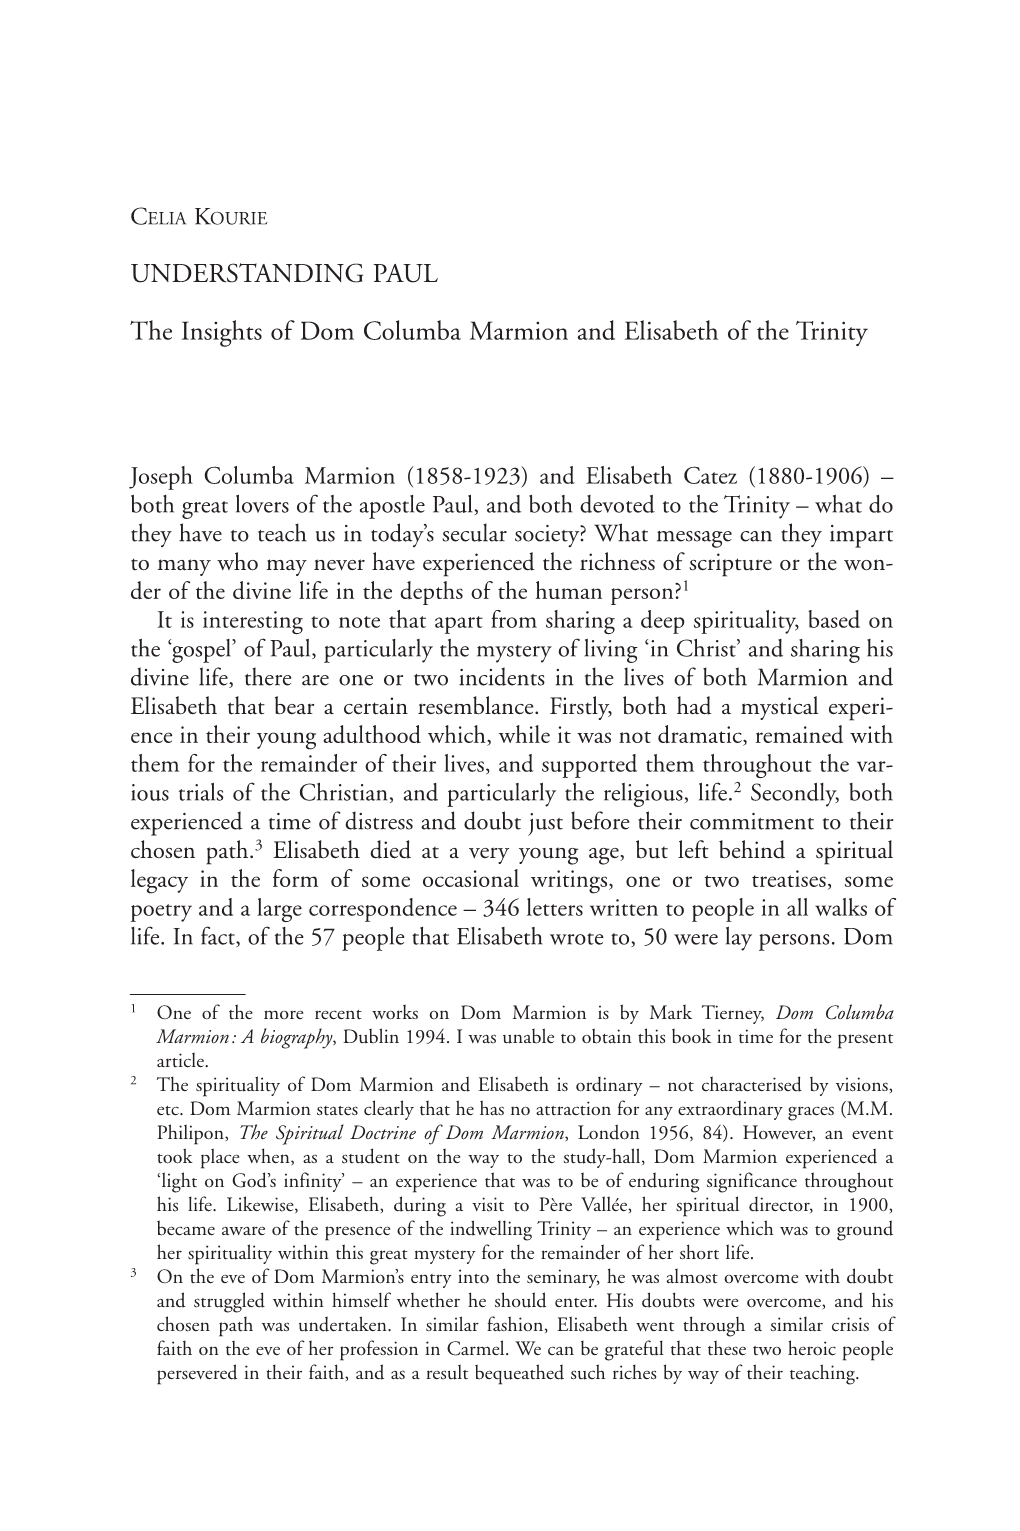 UNDERSTANDING PAUL the Insights of Dom Columba Marmion and Elisabeth of the Trinity